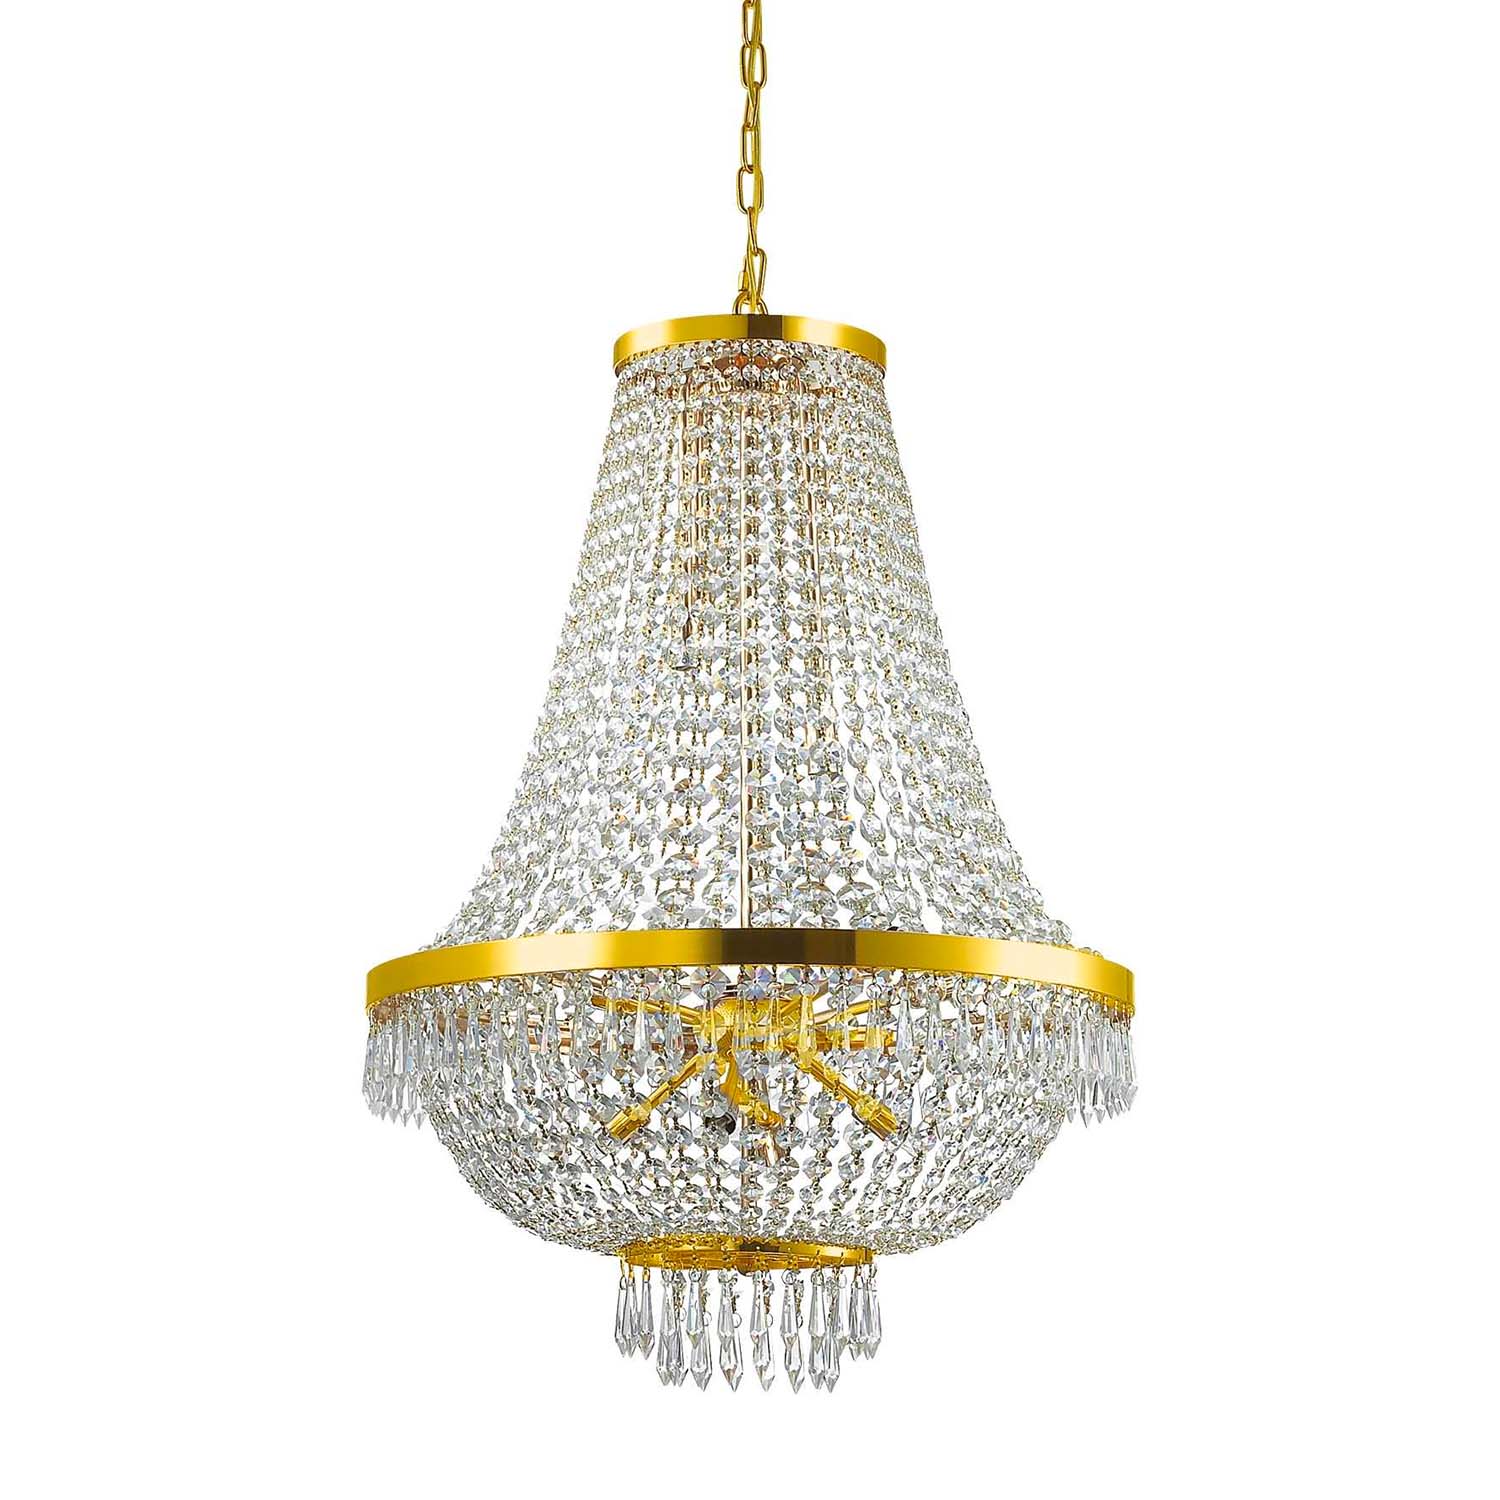 CAESAR - Baroque chandelier in transparent and gold glass